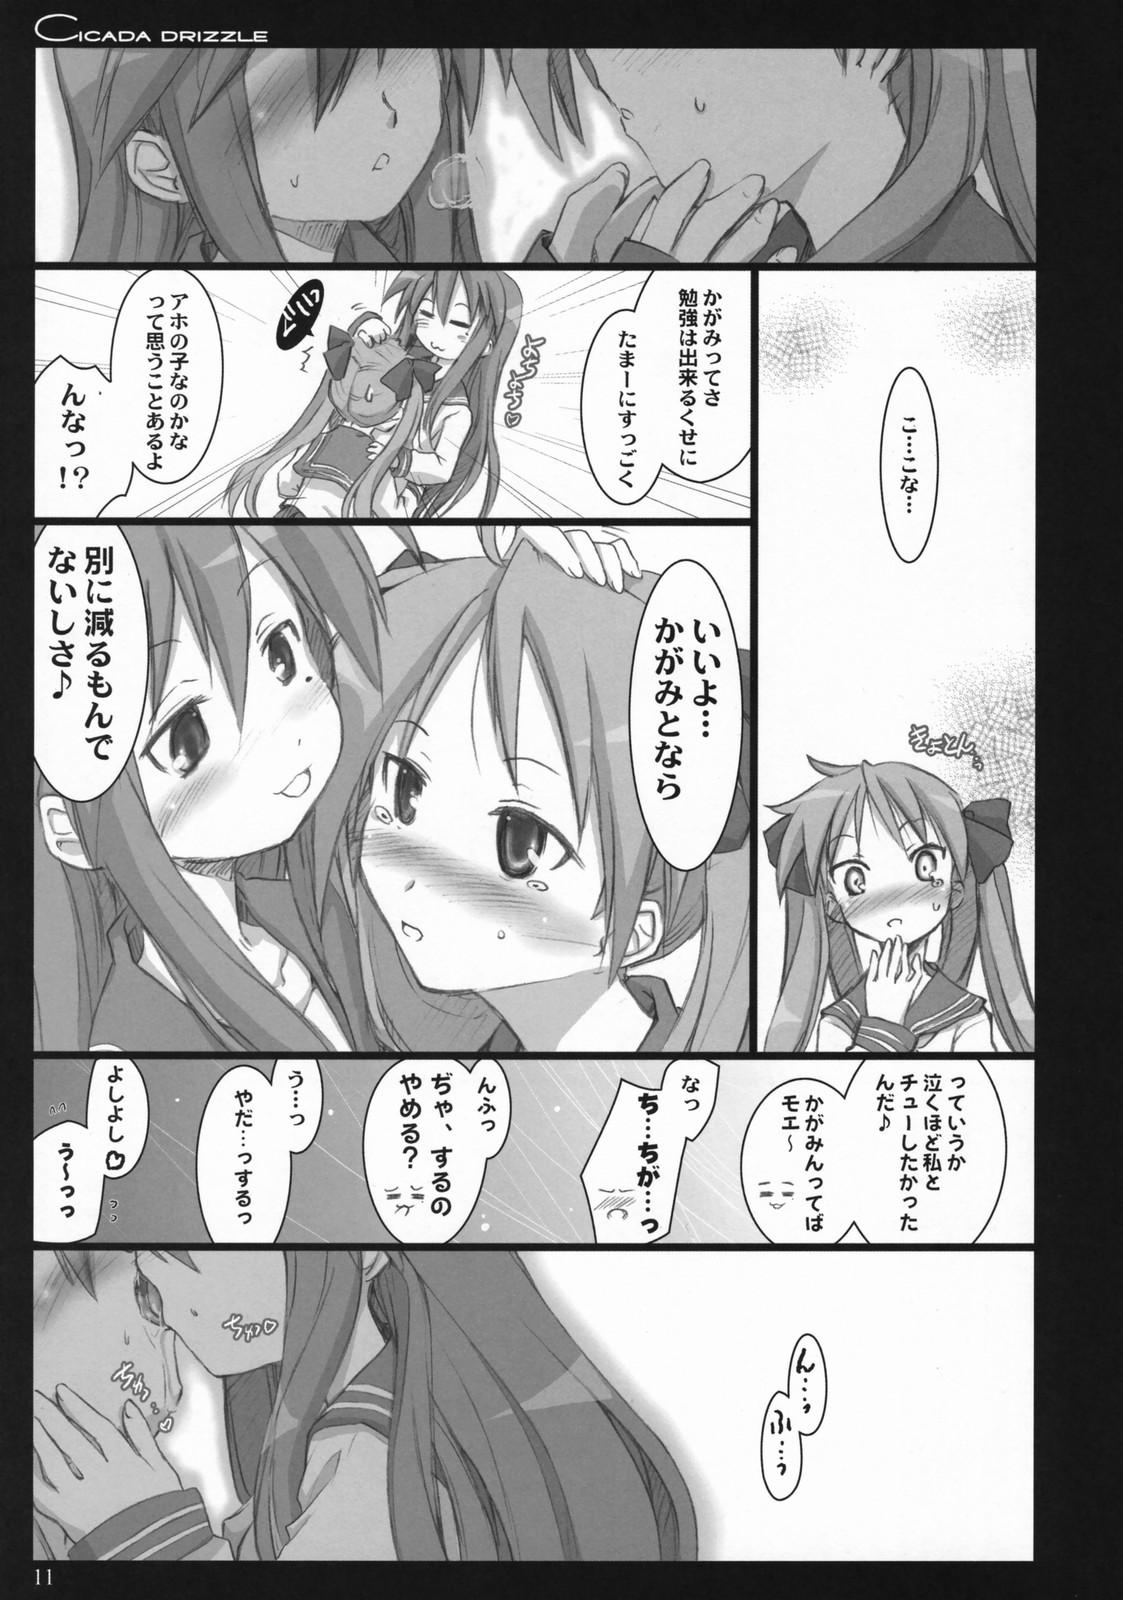 Chick Cicada Drizzle - Lucky star Gaysex - Page 10